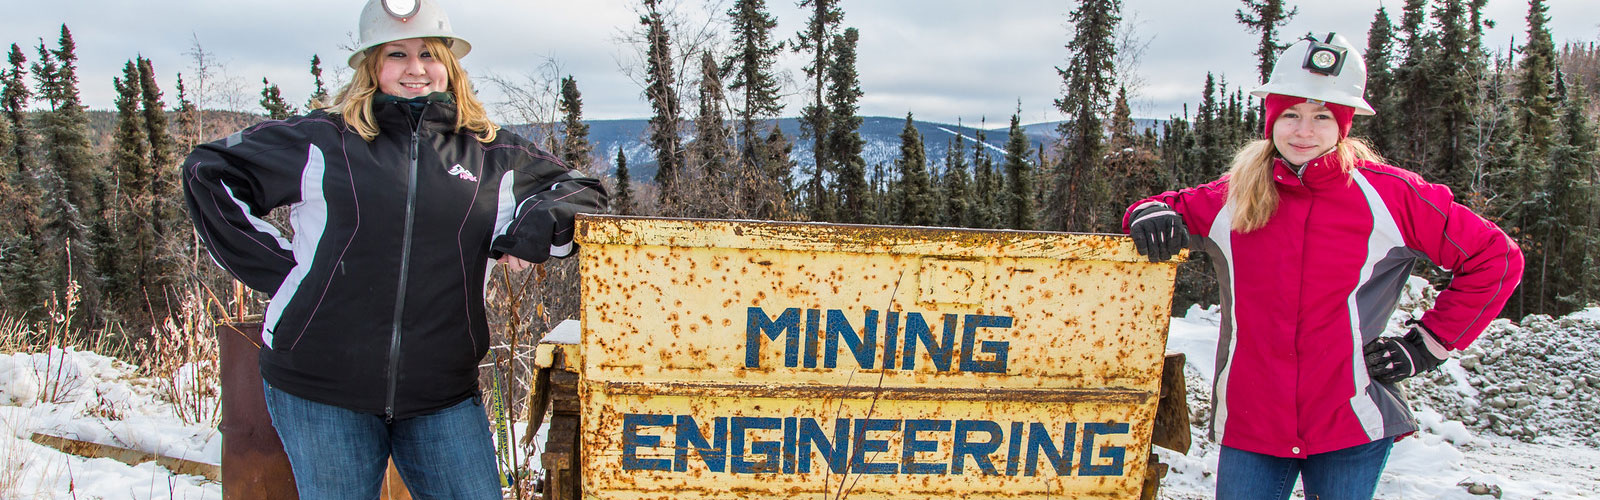 Students posing in front of miningb engineering sign